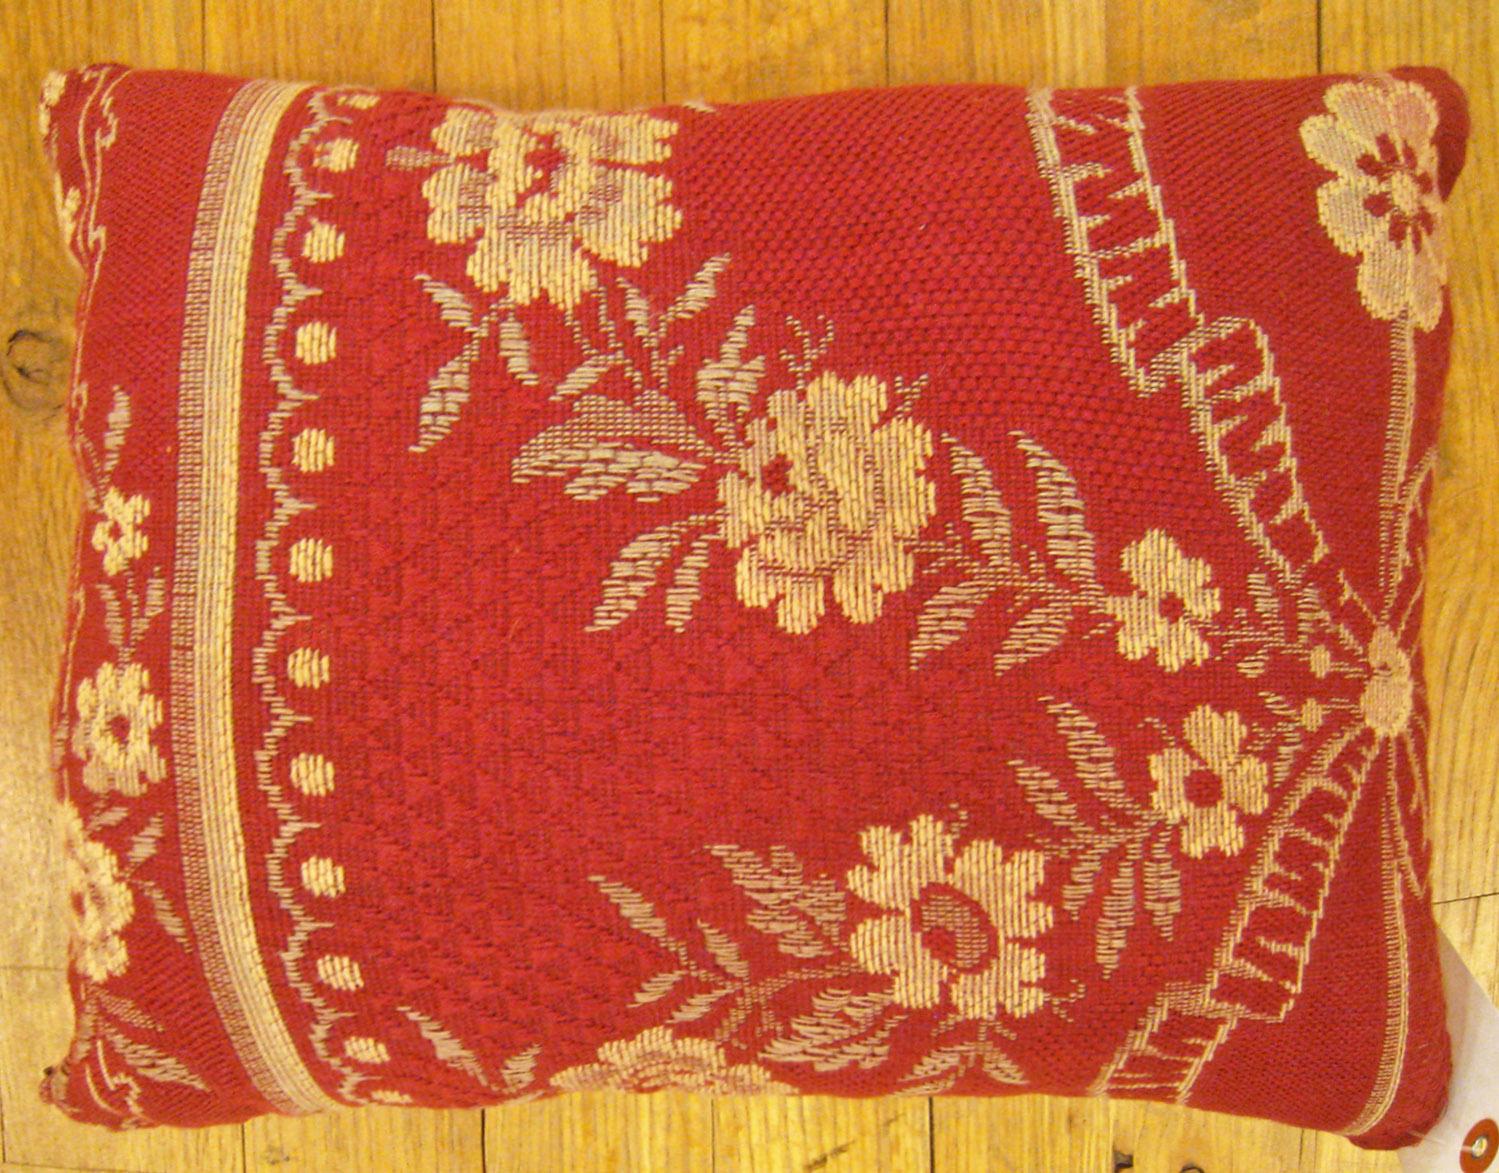 Antique Jacquard Tapestry pillow; size 1'0” x 1'2”.

An antique decorative pillow with floral elements allover a red central field, size 1'0